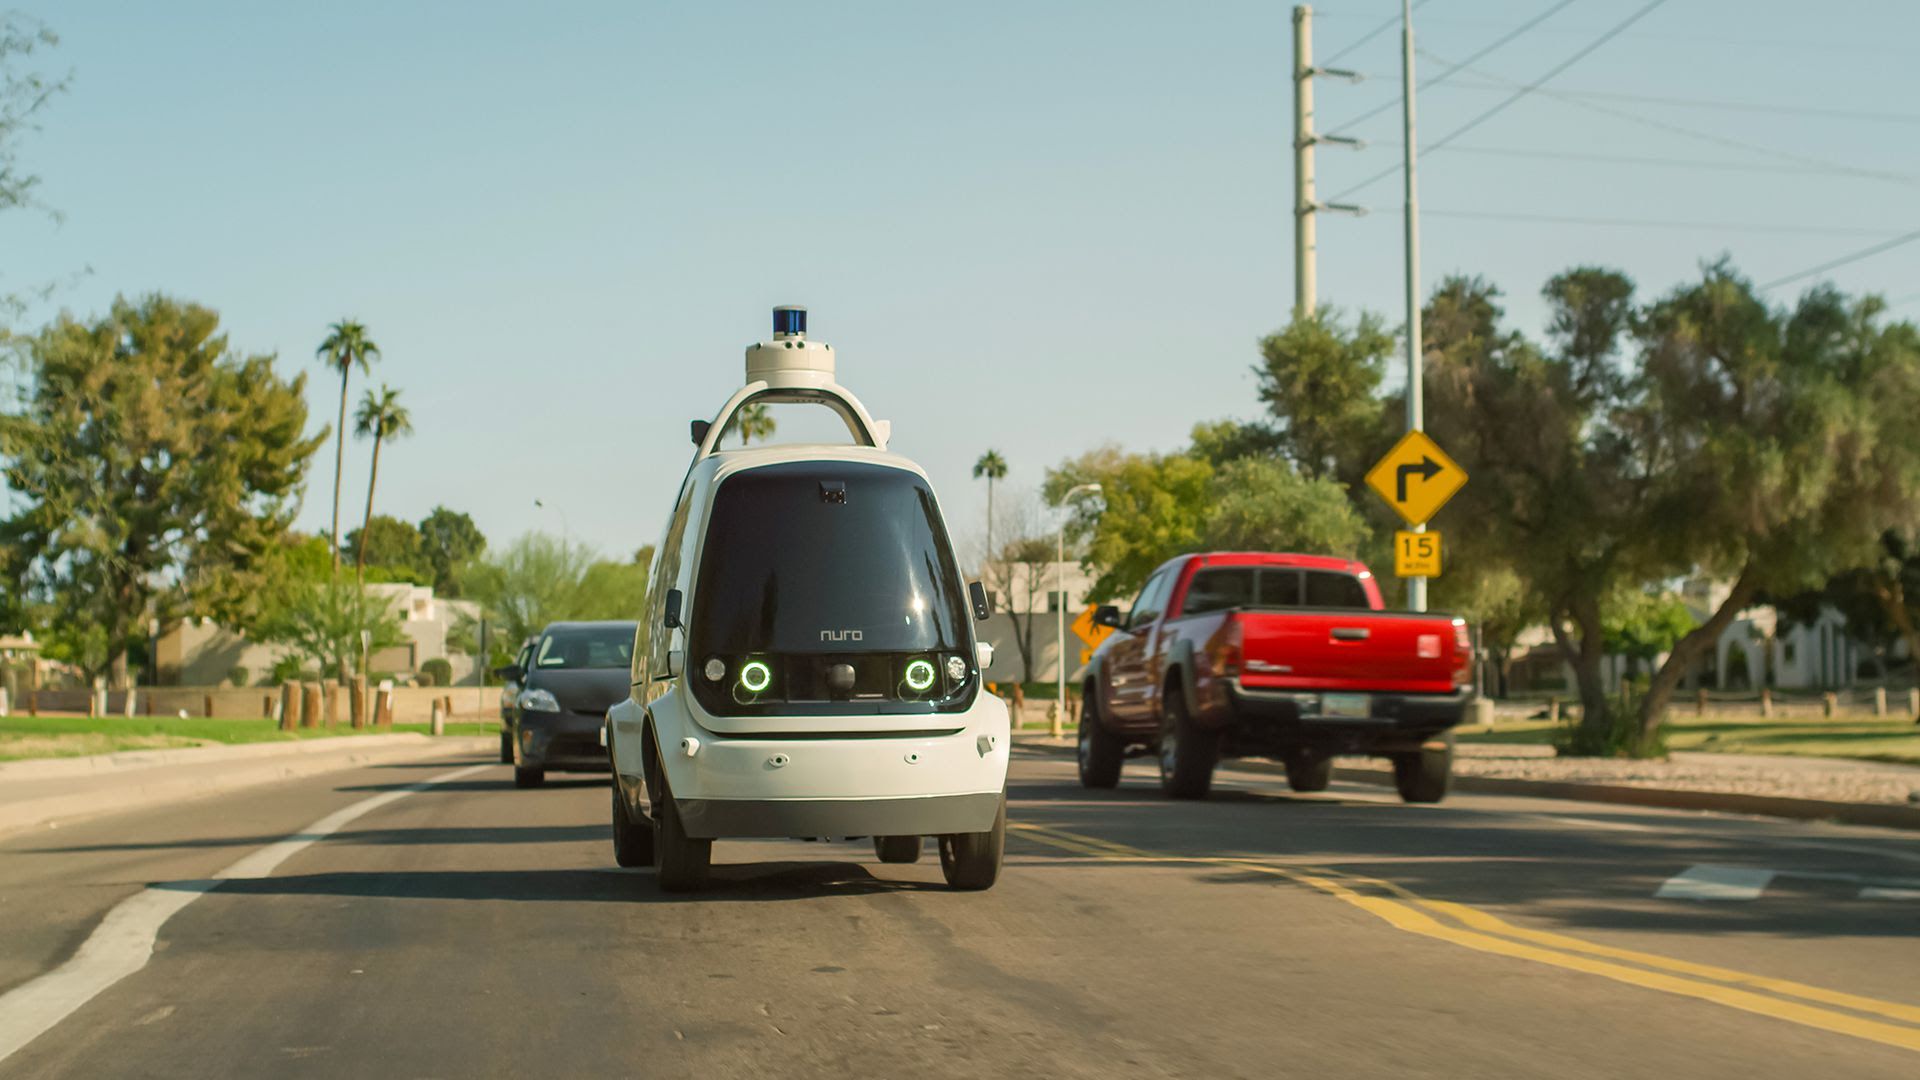 Nuro's unmanned delivery vehicles are half the width of a Toyota Camry and limited to 25 mph